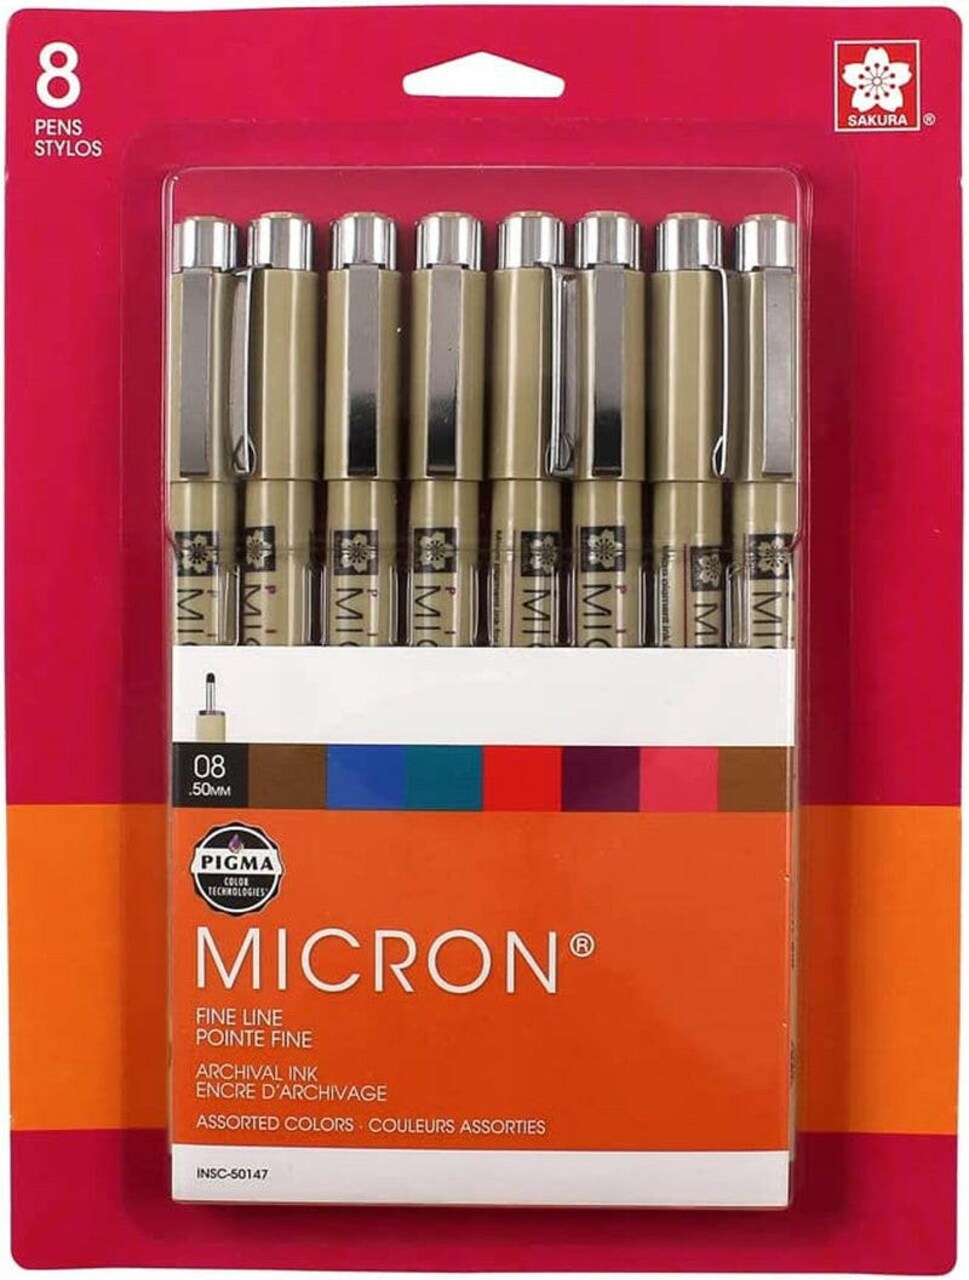 SAKURA Pigma Micron Fineliner Pens - Archival Black and Colored Ink Pens -  Pens for Writing, Drawing, or Journaling - Black and Colored Ink - 05 Point  Size - 8 Pack